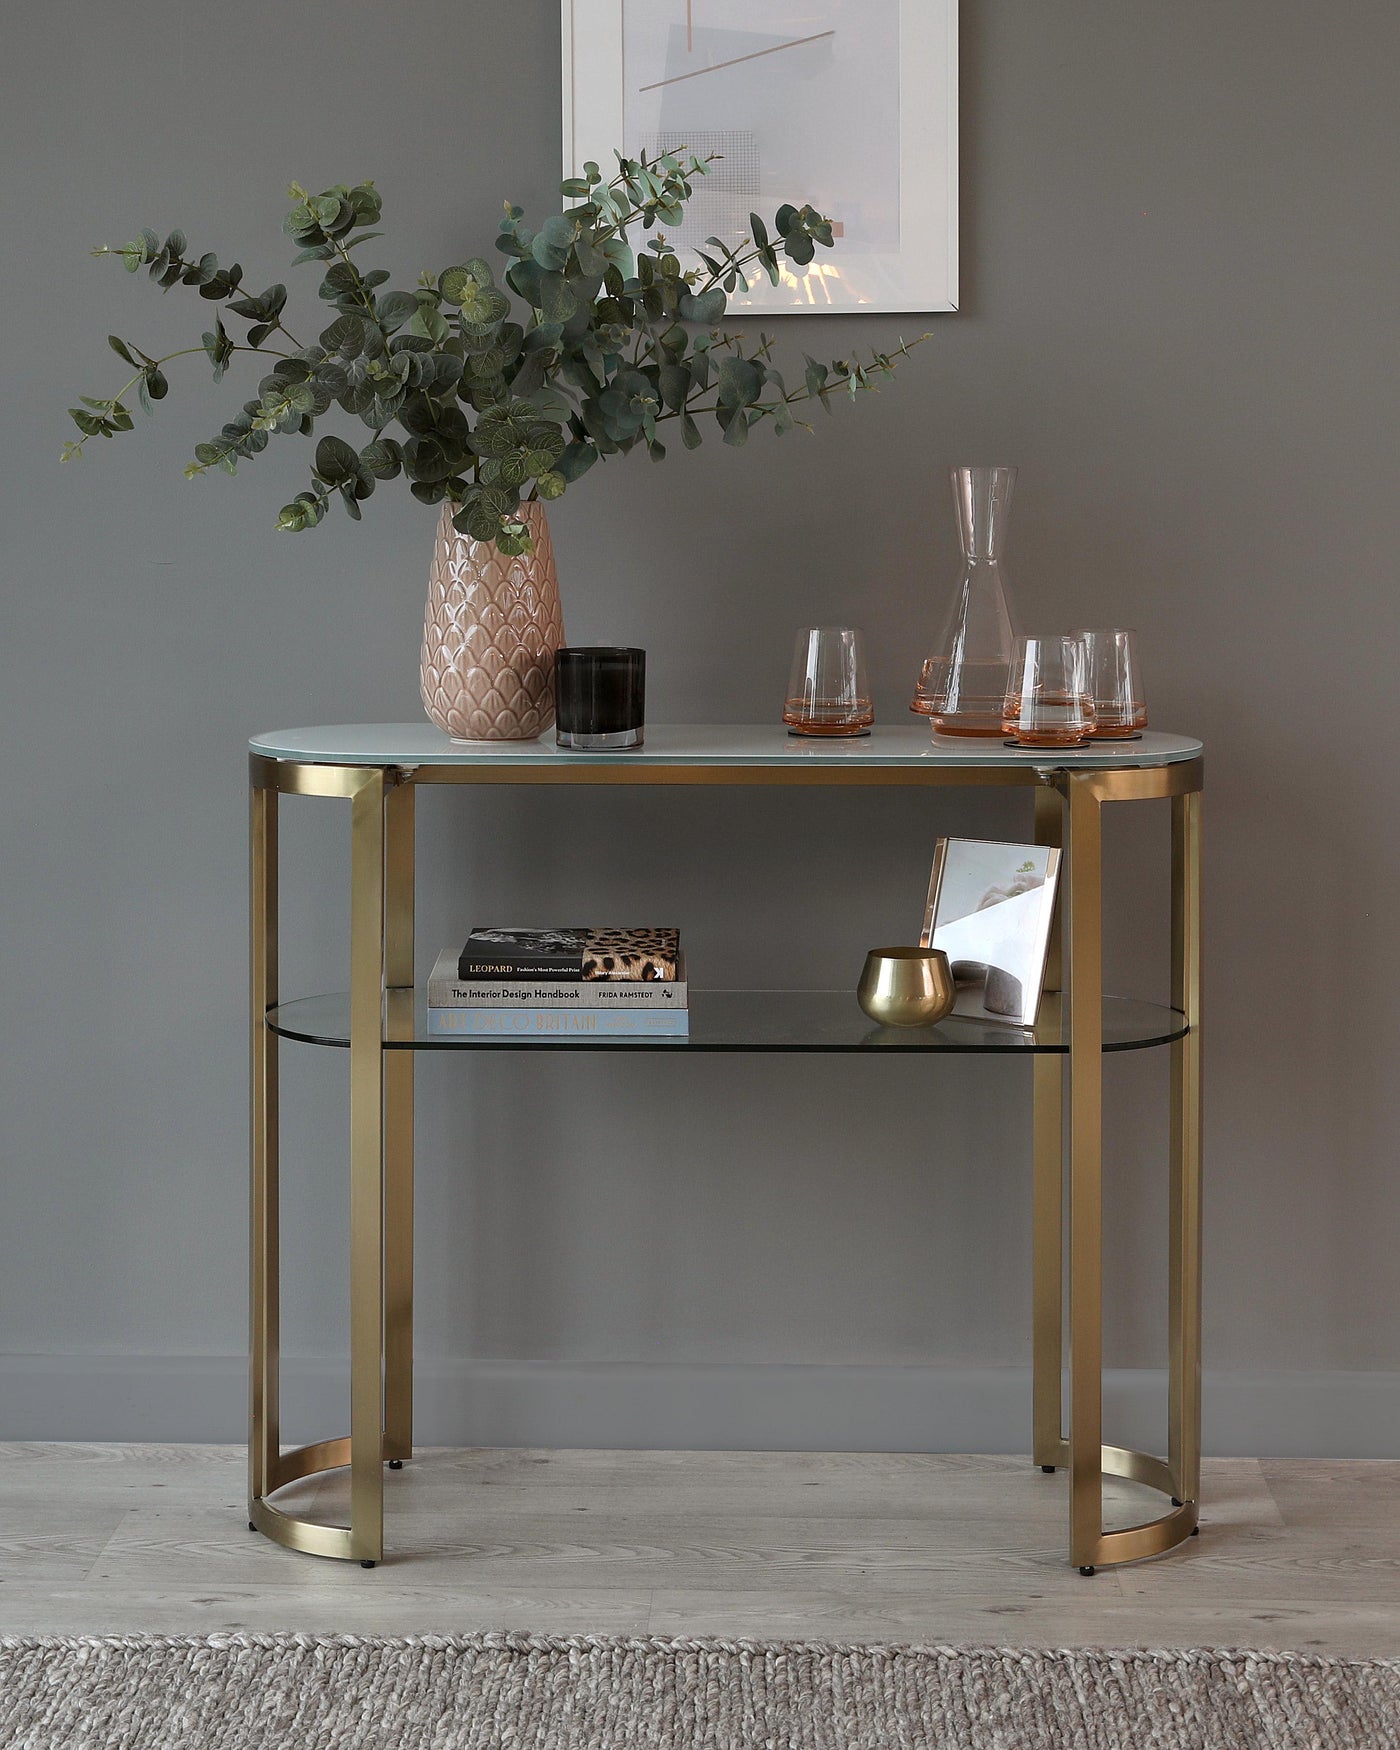 Elegant console table with a sleek, gold-finish metal frame and two tiers featuring glass surfaces, set against a grey wall on a light wooden floor.